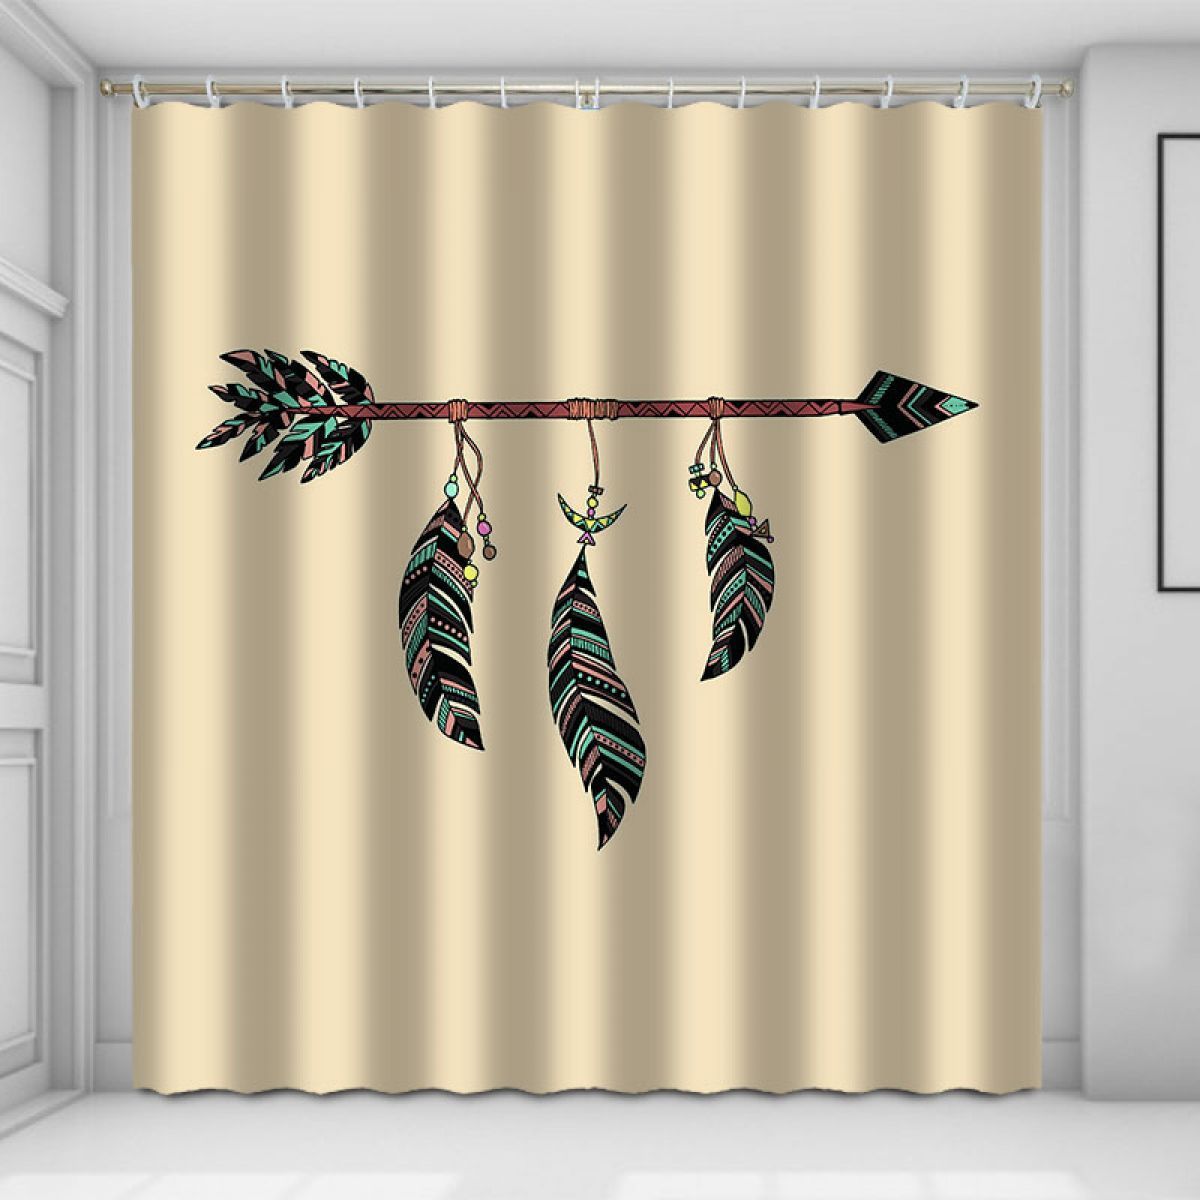 black feather printed window curtain home decor 6746